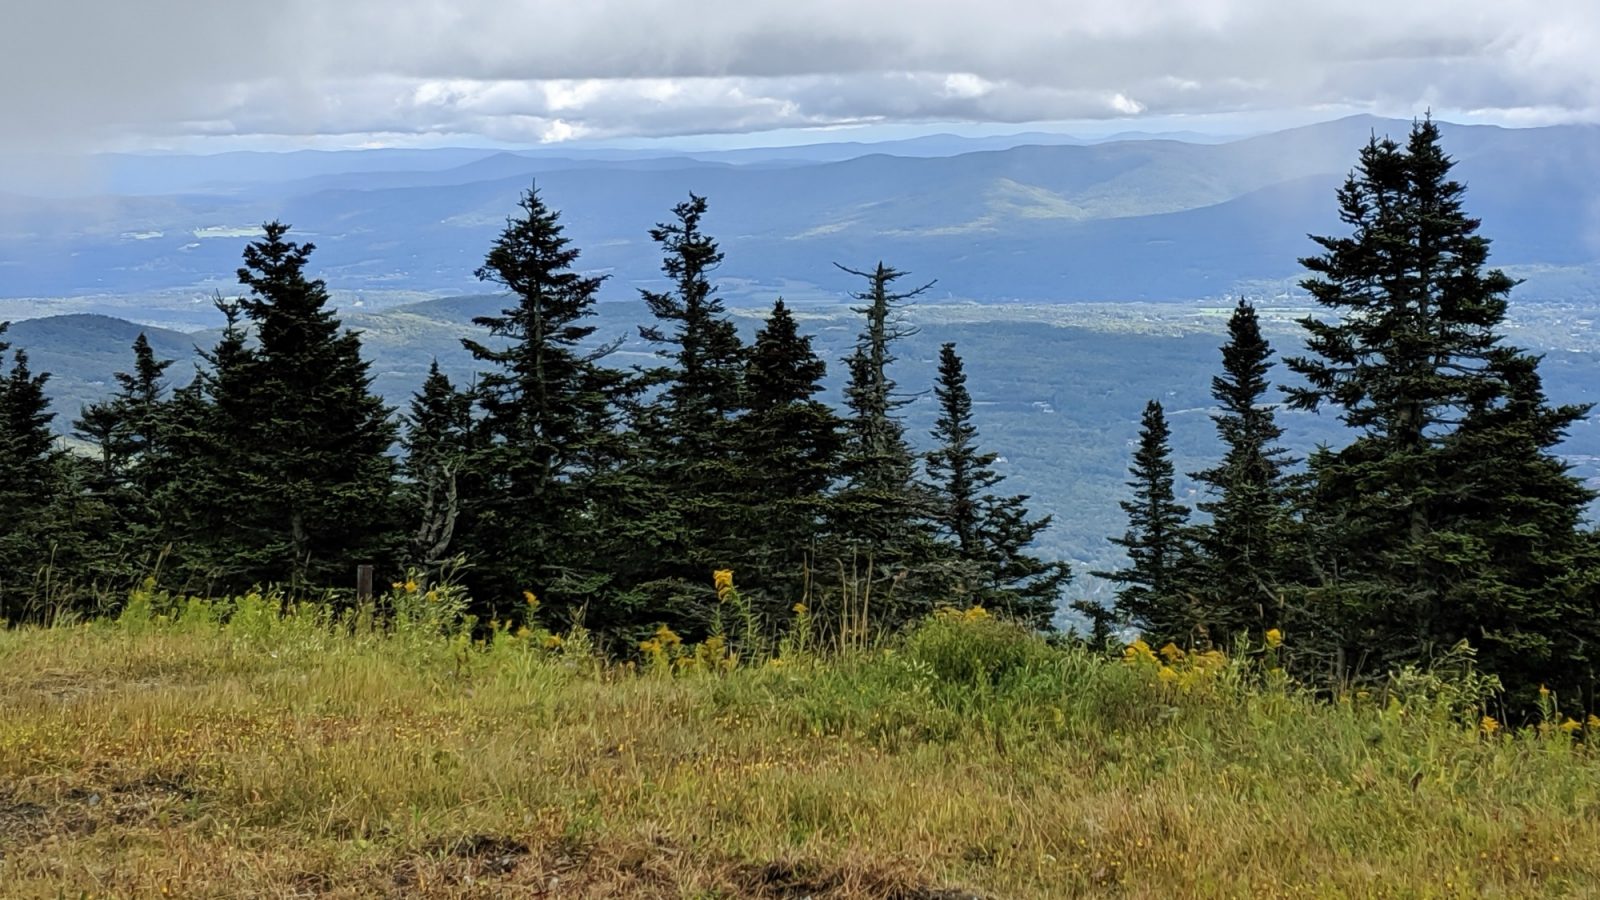 11 Ways to Fill Your Days During a Weekend in Vermont | Craft beer, farmers market, bed and breakfast hiking in the mountains, von trapp family lodge, shopping, history, etc. #vermont #newengland